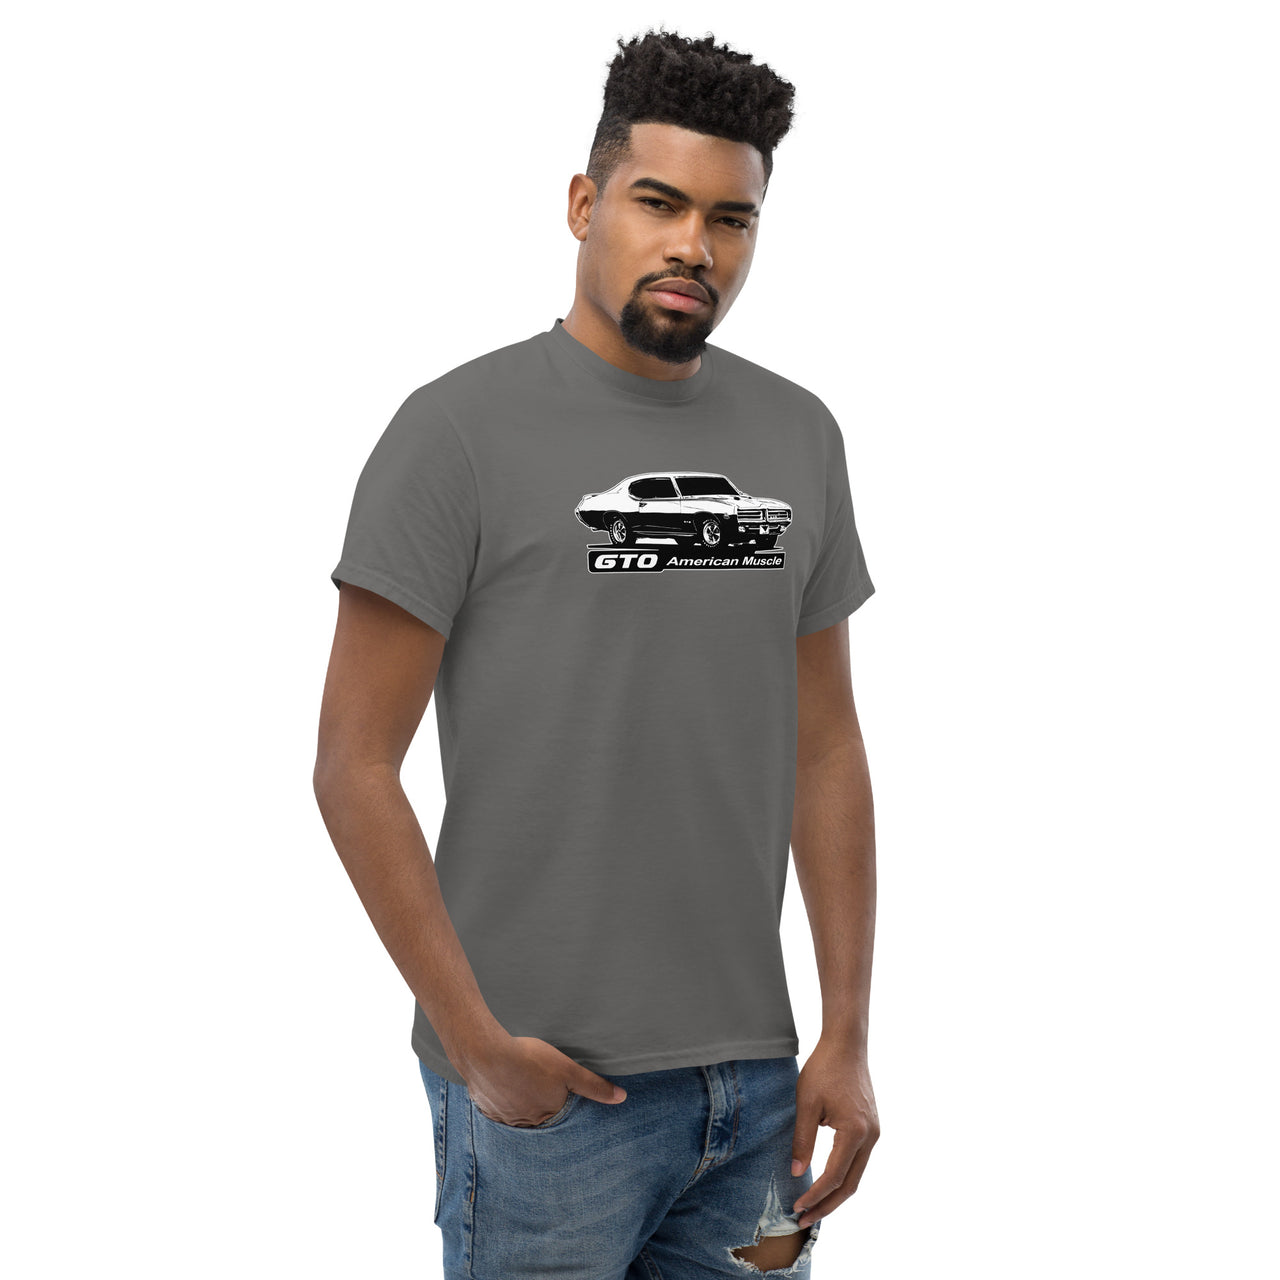 1969 GTO T-Shirt modeled in grey